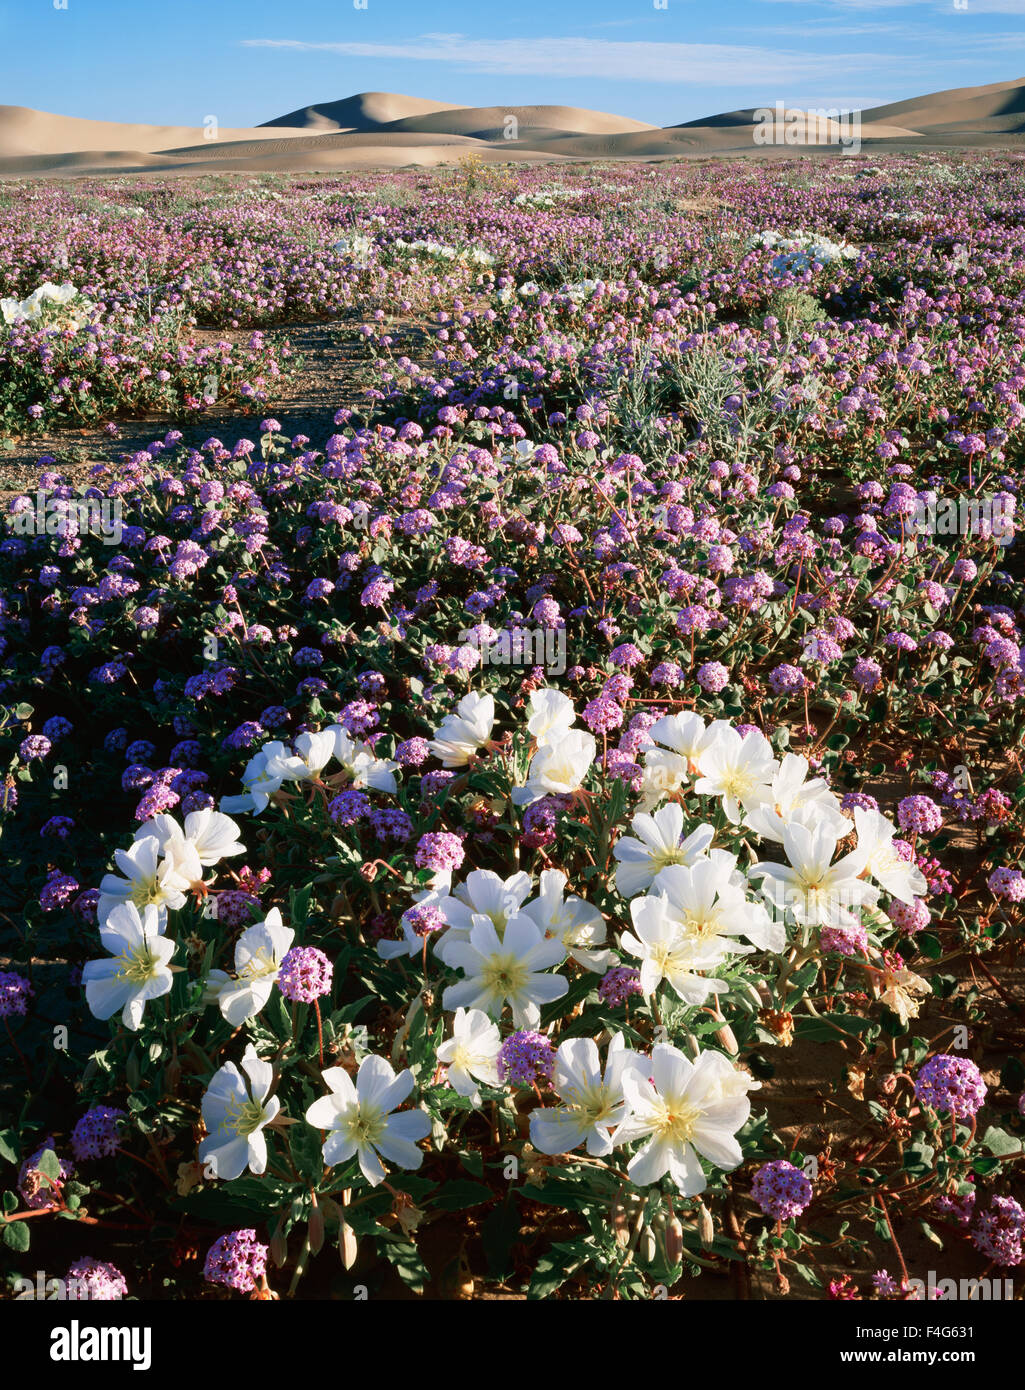 California, Dumont Dunes, Dune Evening Primrose (Oenothera deltoides) and Sand Verbena (Abronia villosa) Wildflowers cover the sand dunes in the Mojave Desert. (Large format sizes available) Stock Photo